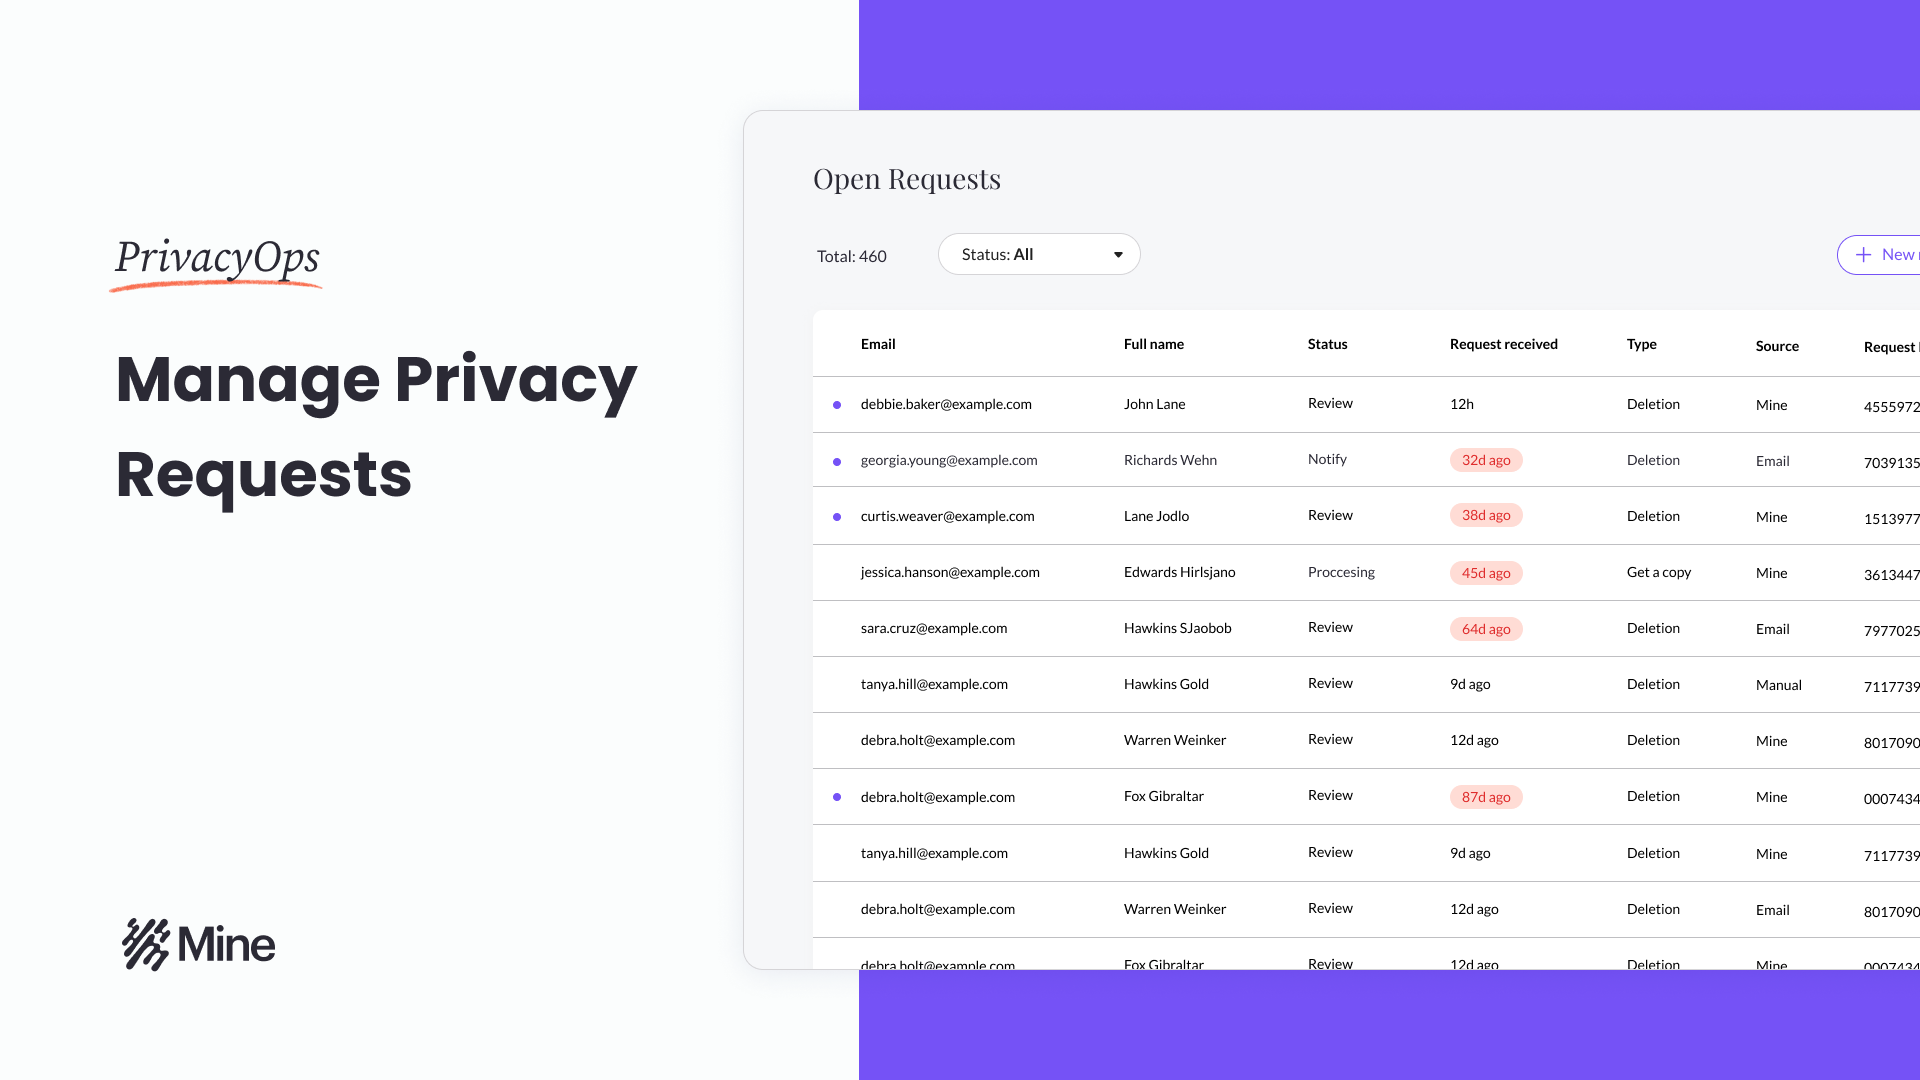 With Mine’s consumer-centric Privacy Portal, you can reduce the time and cost of handling incoming privacy requests and improve your brand trust and loyalty.